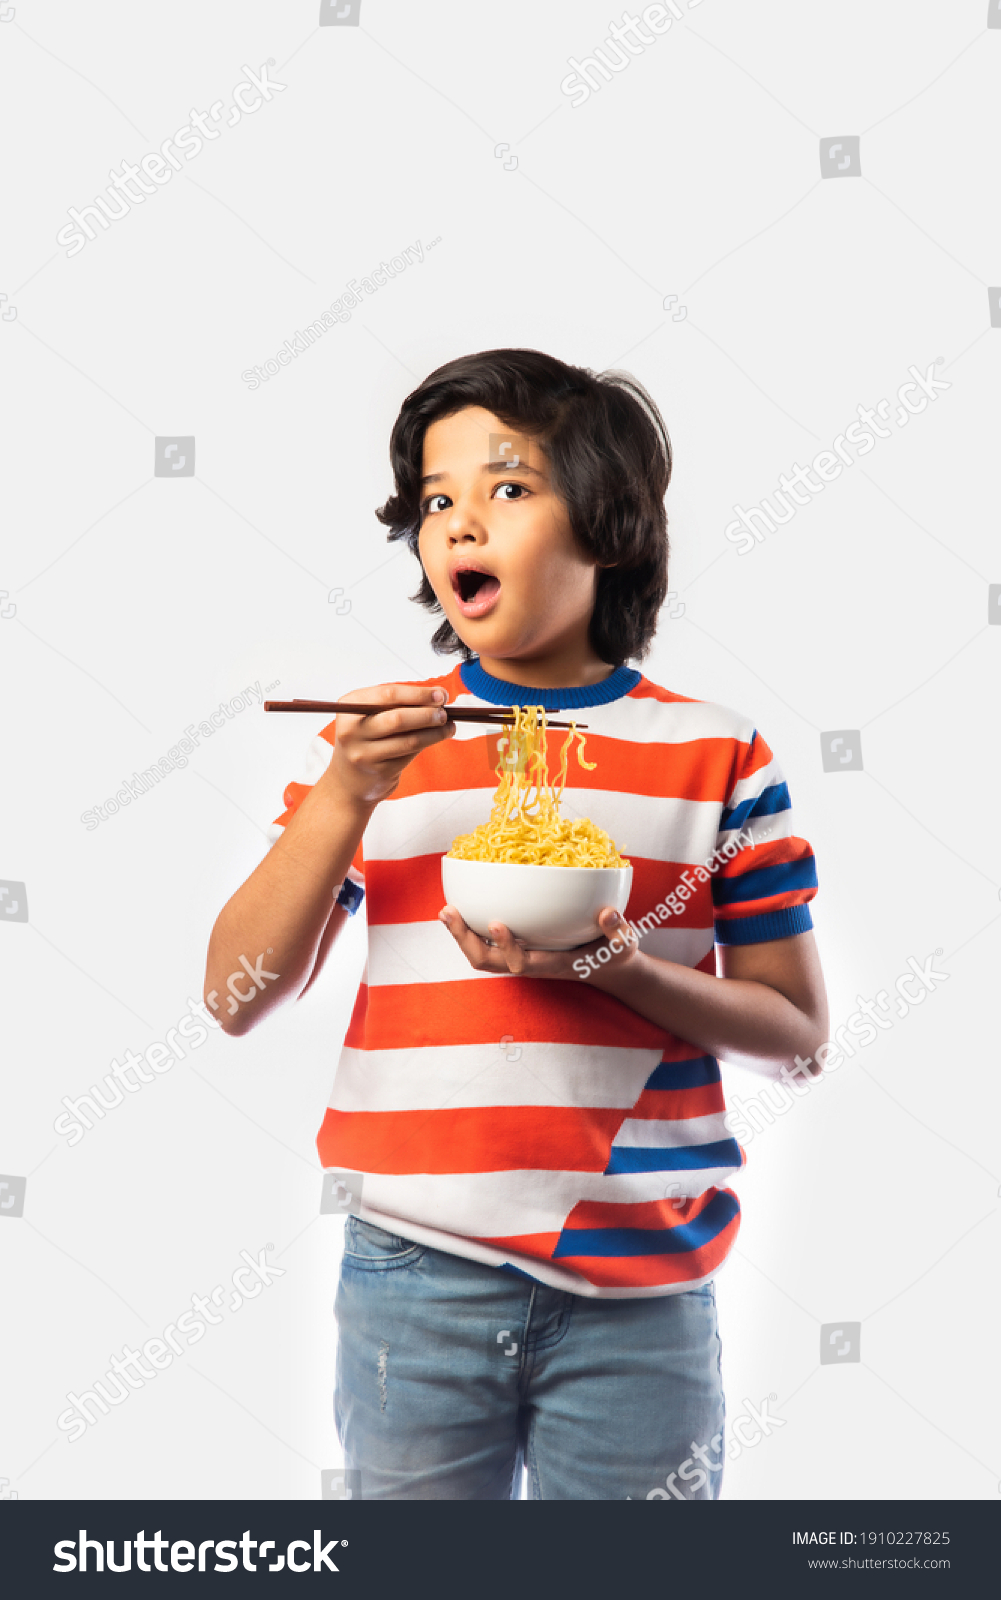 Indian Child Eating Delicious Noodles Fork Stock Photo 1910227825 ...